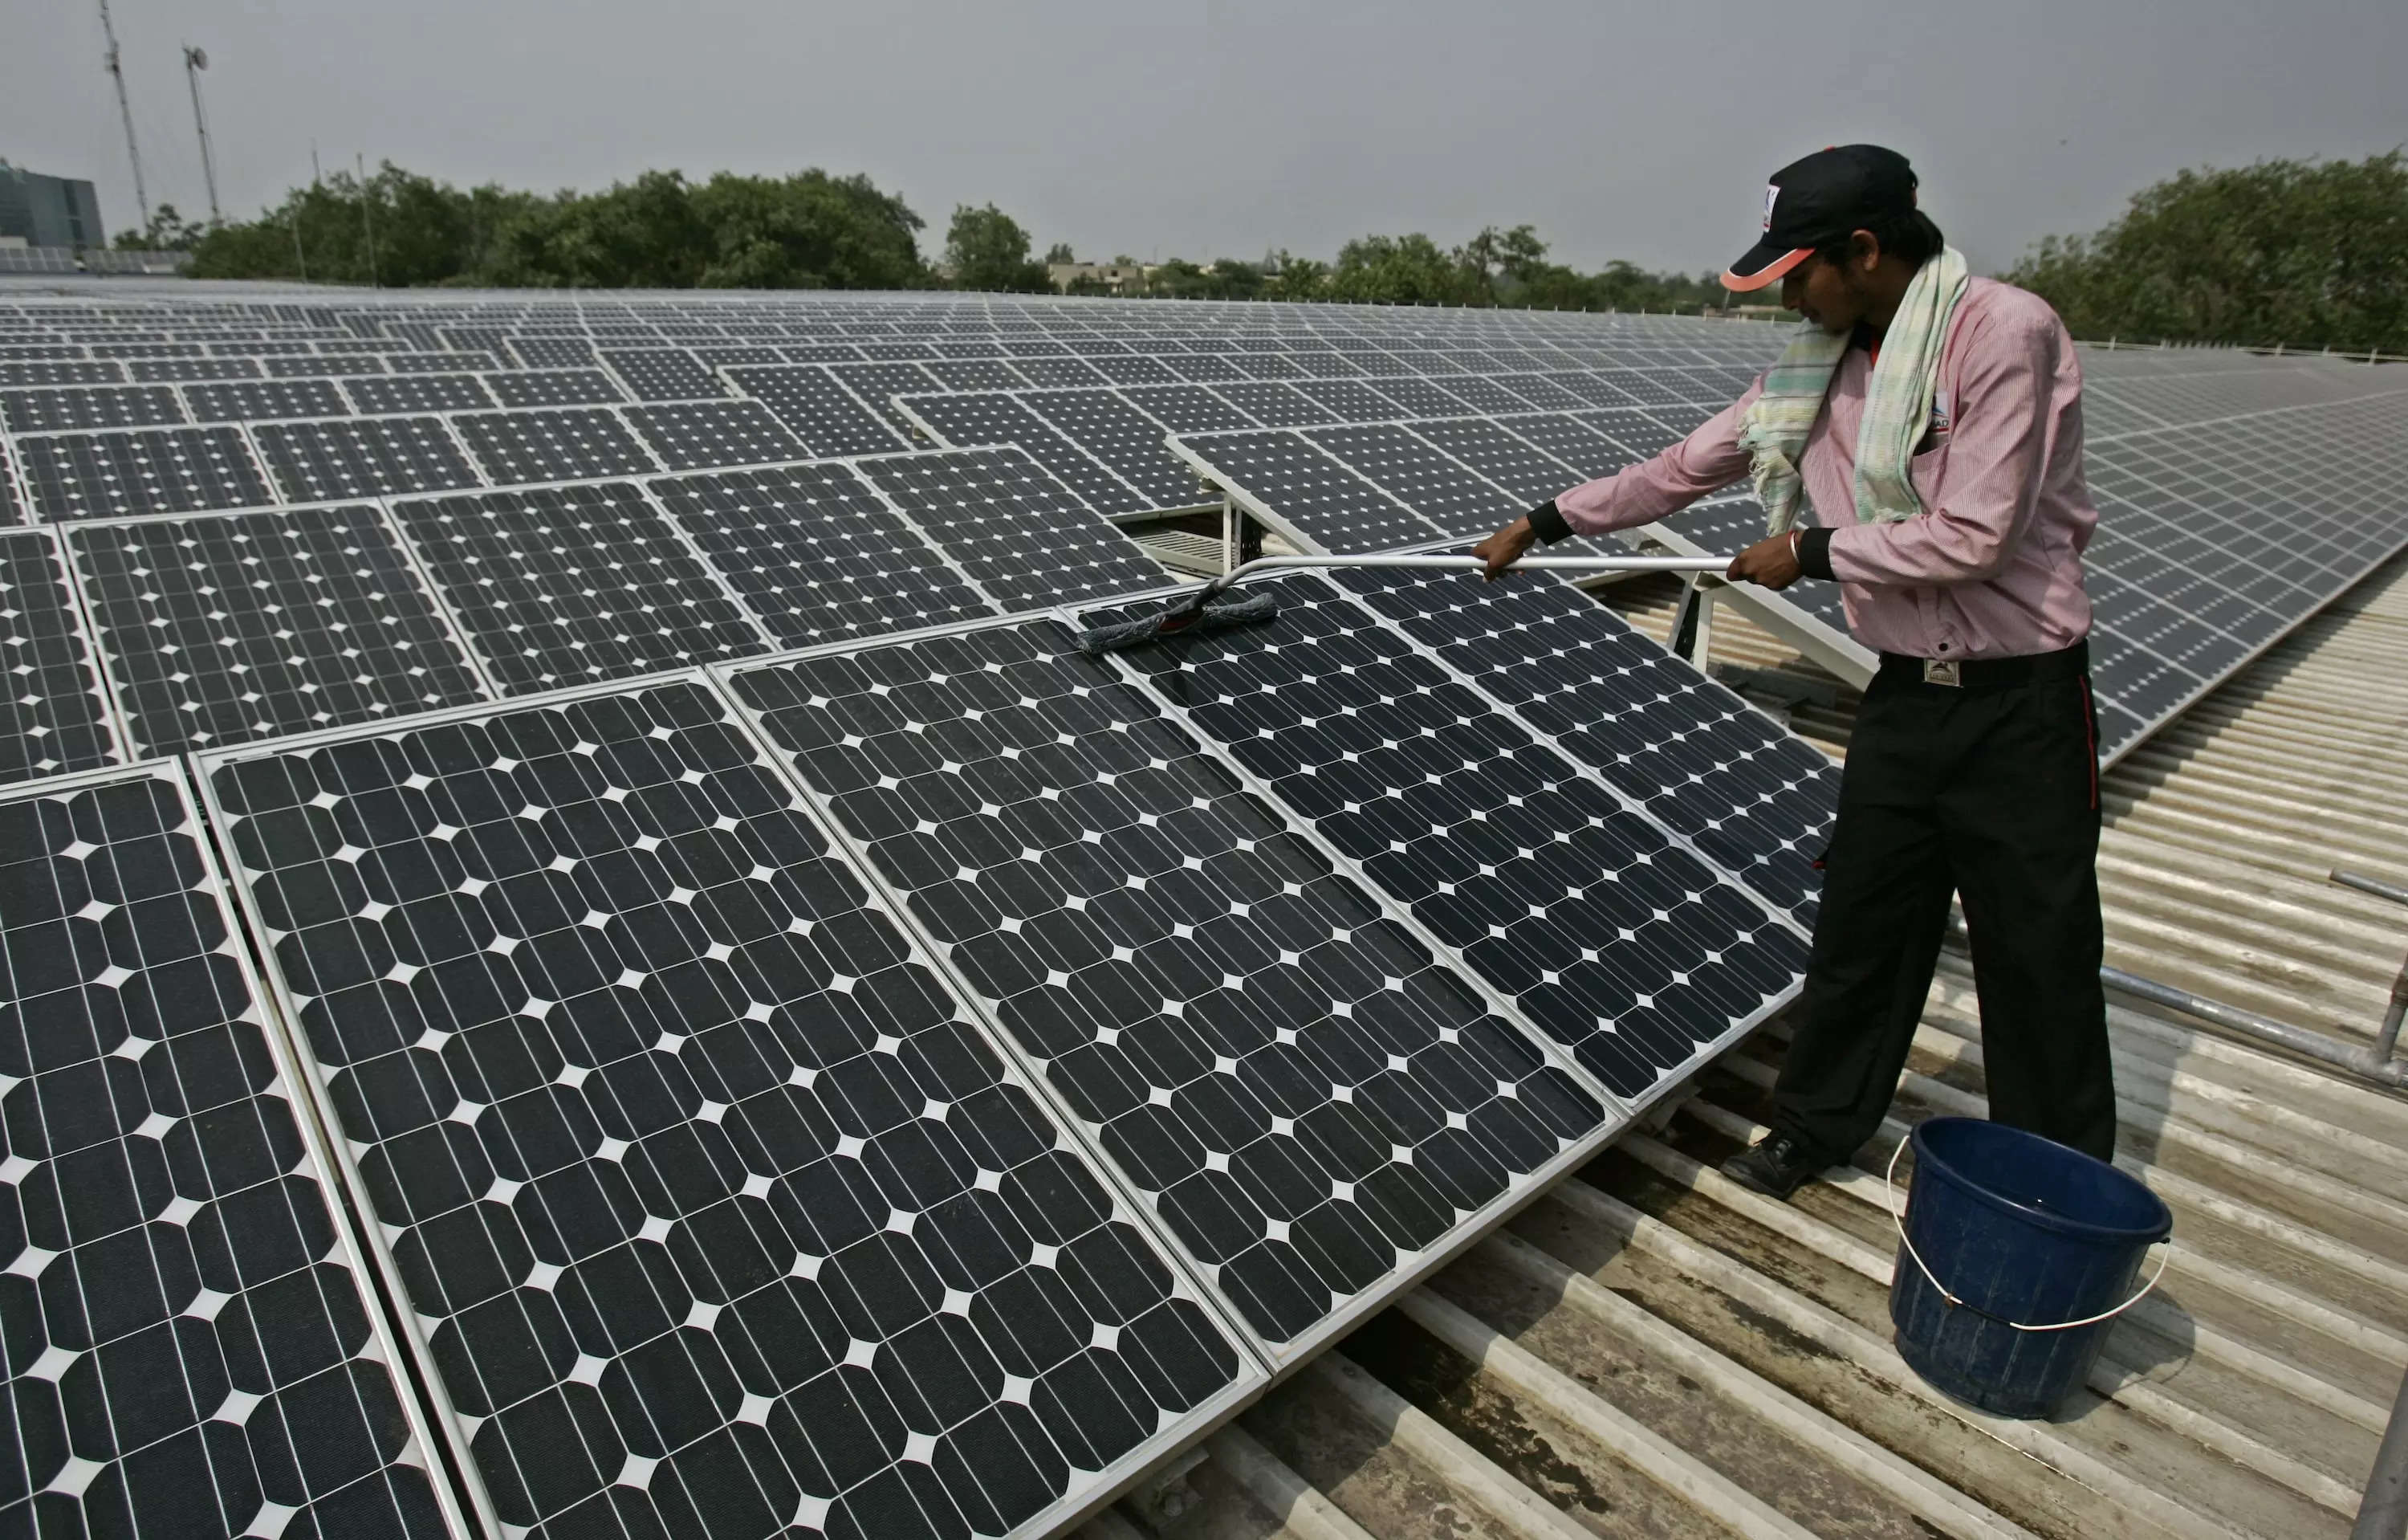 Green energy revolution: How are microinverters changing the solar landscape in India? 